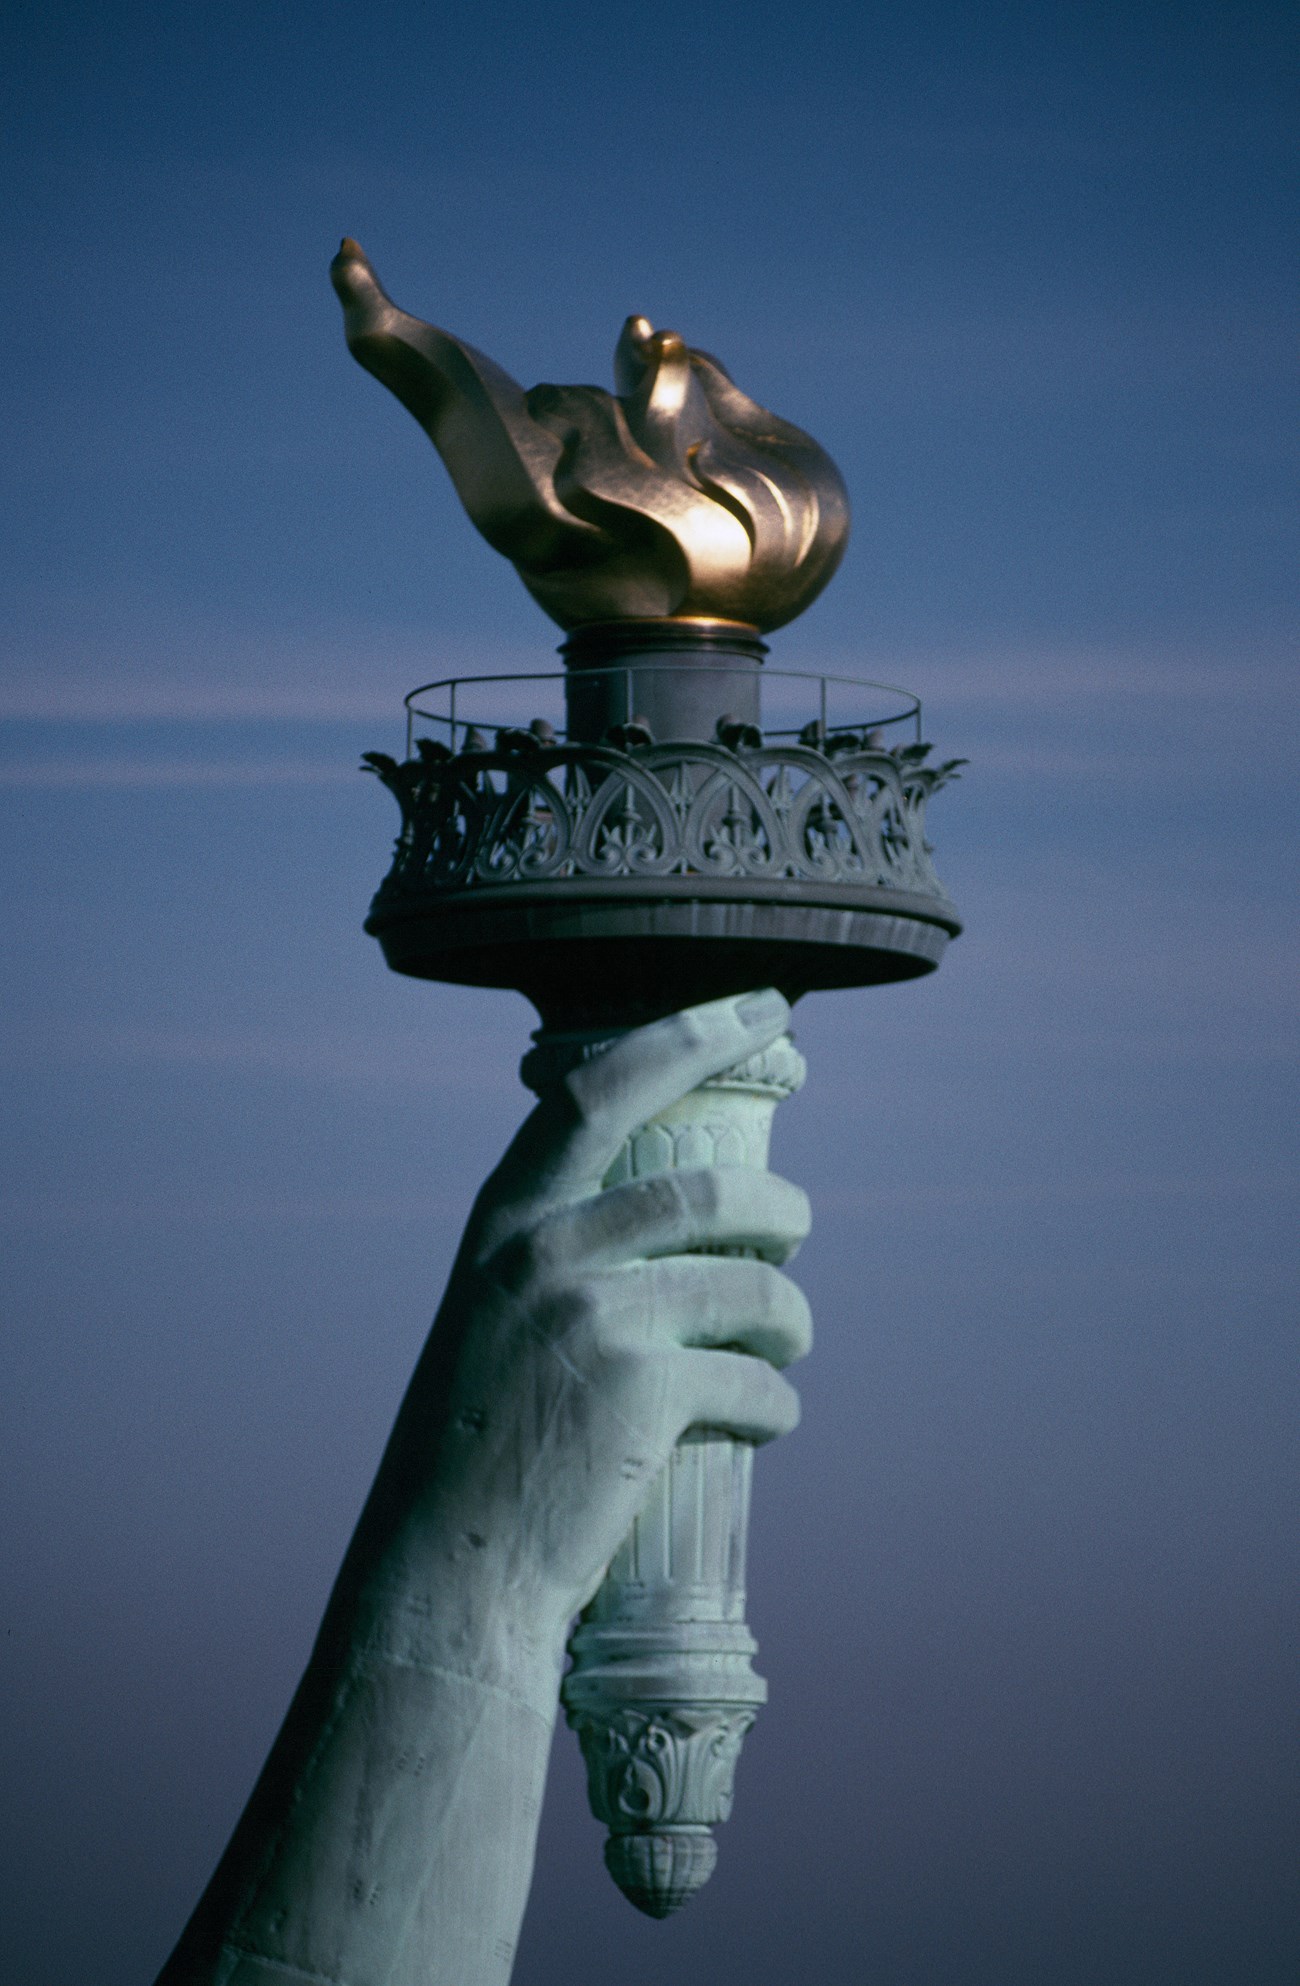 Close-up of the golden torch of the Statue of Liberty held in the statue's outstretched hand